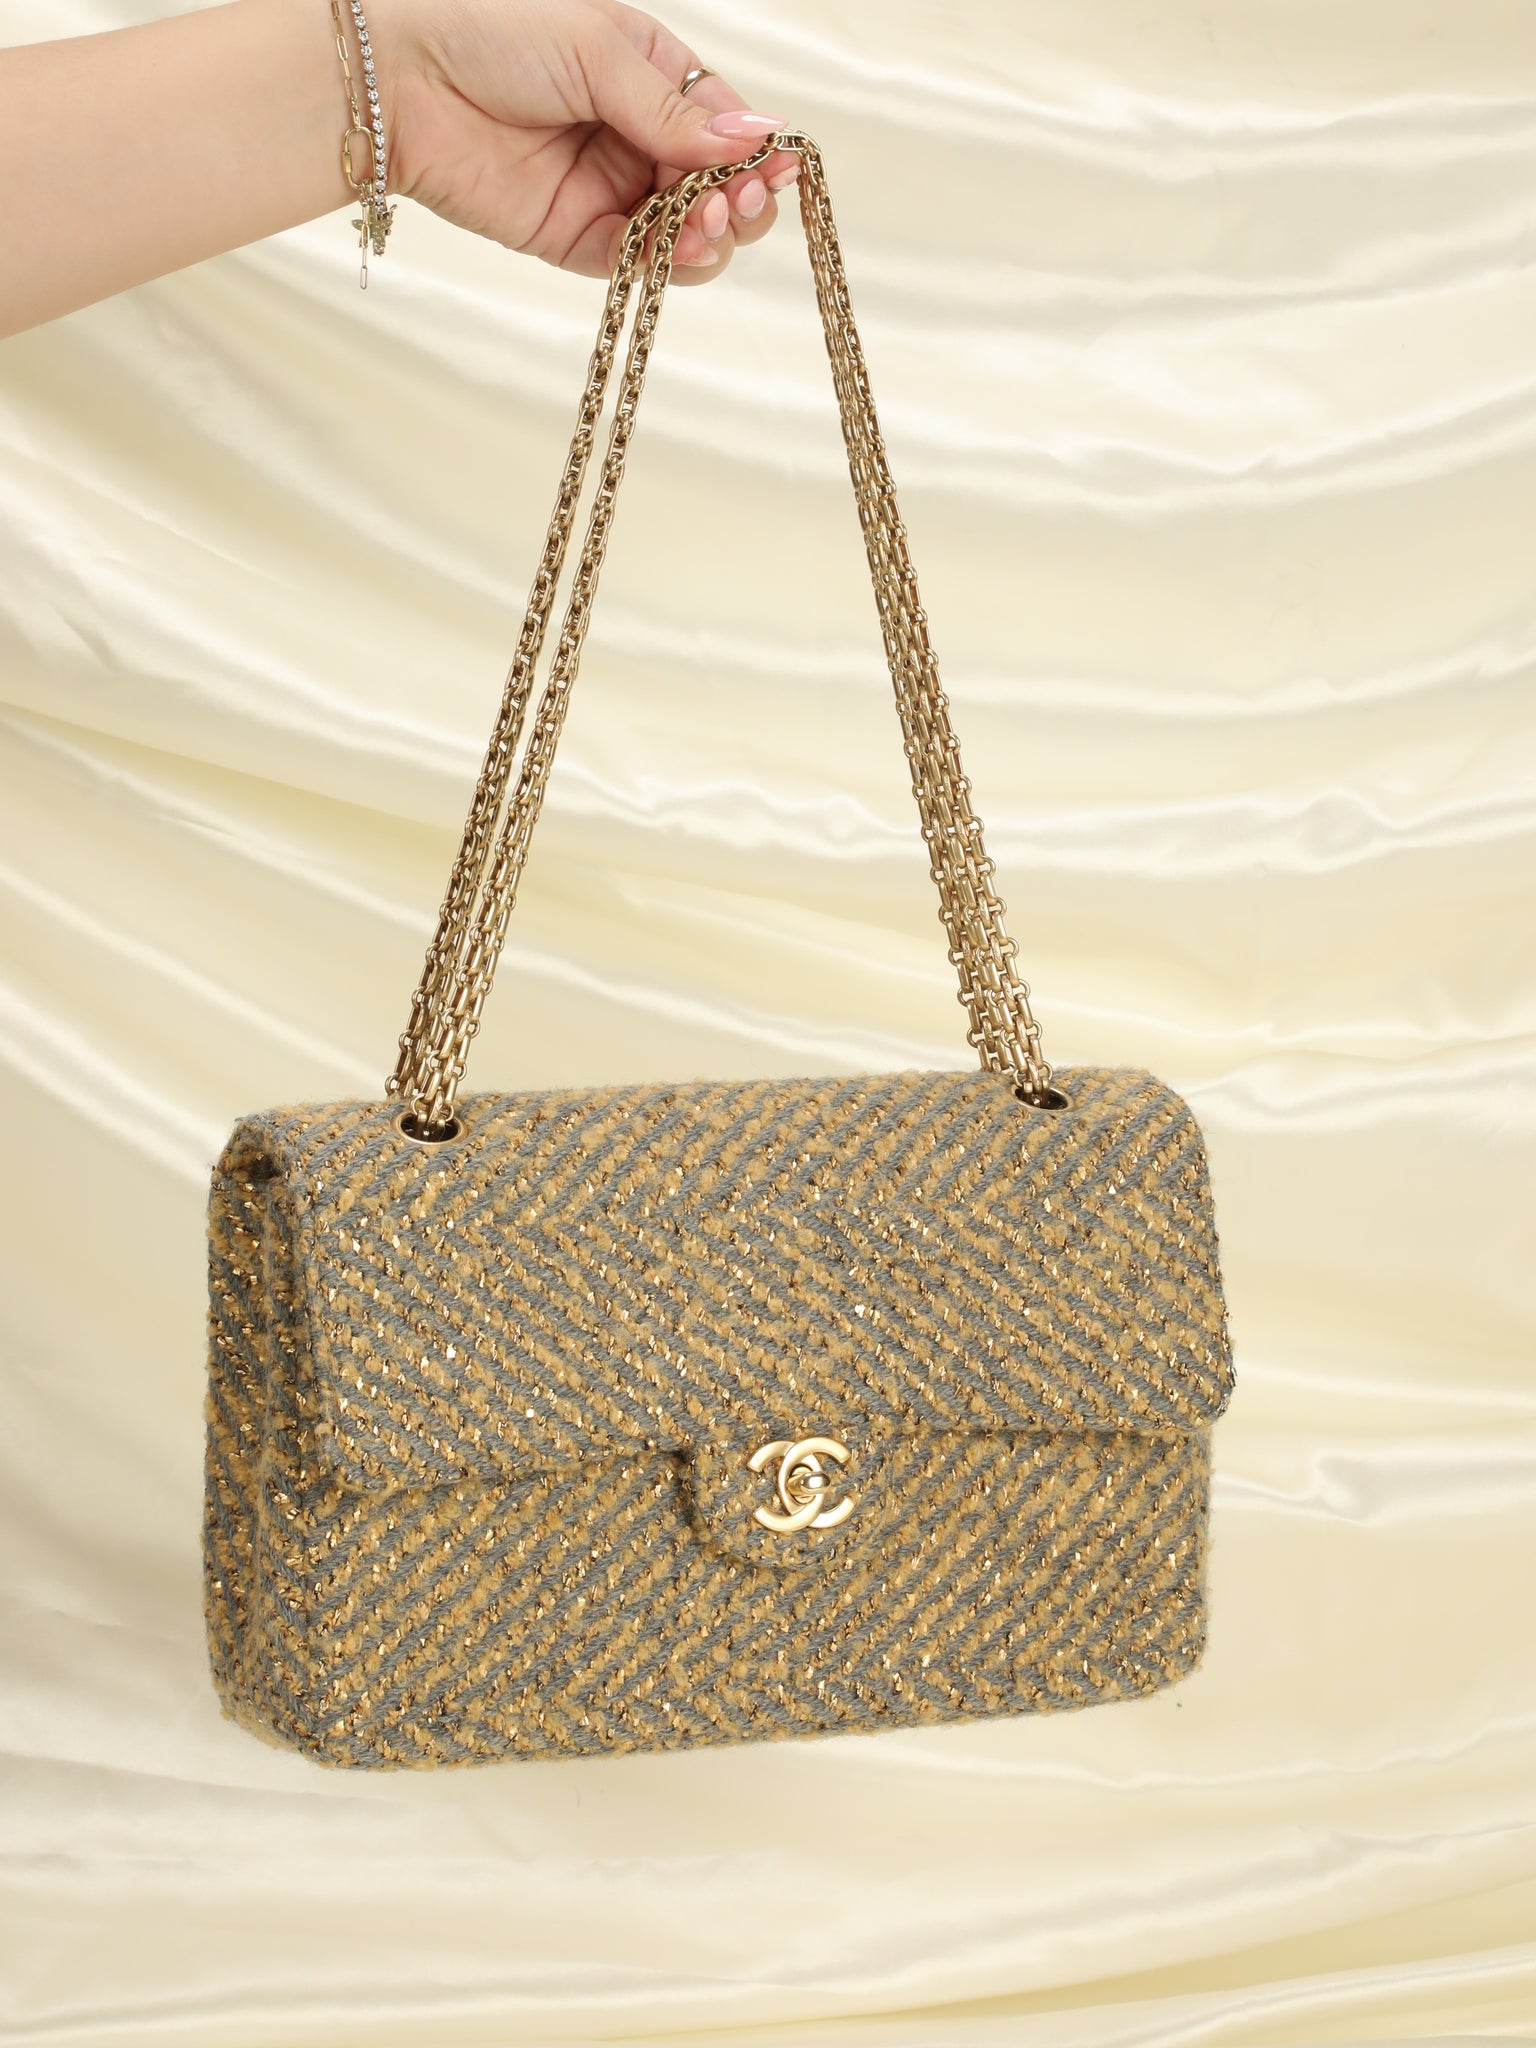 Extremely Rare Chanel Tweed Bijoux Bag